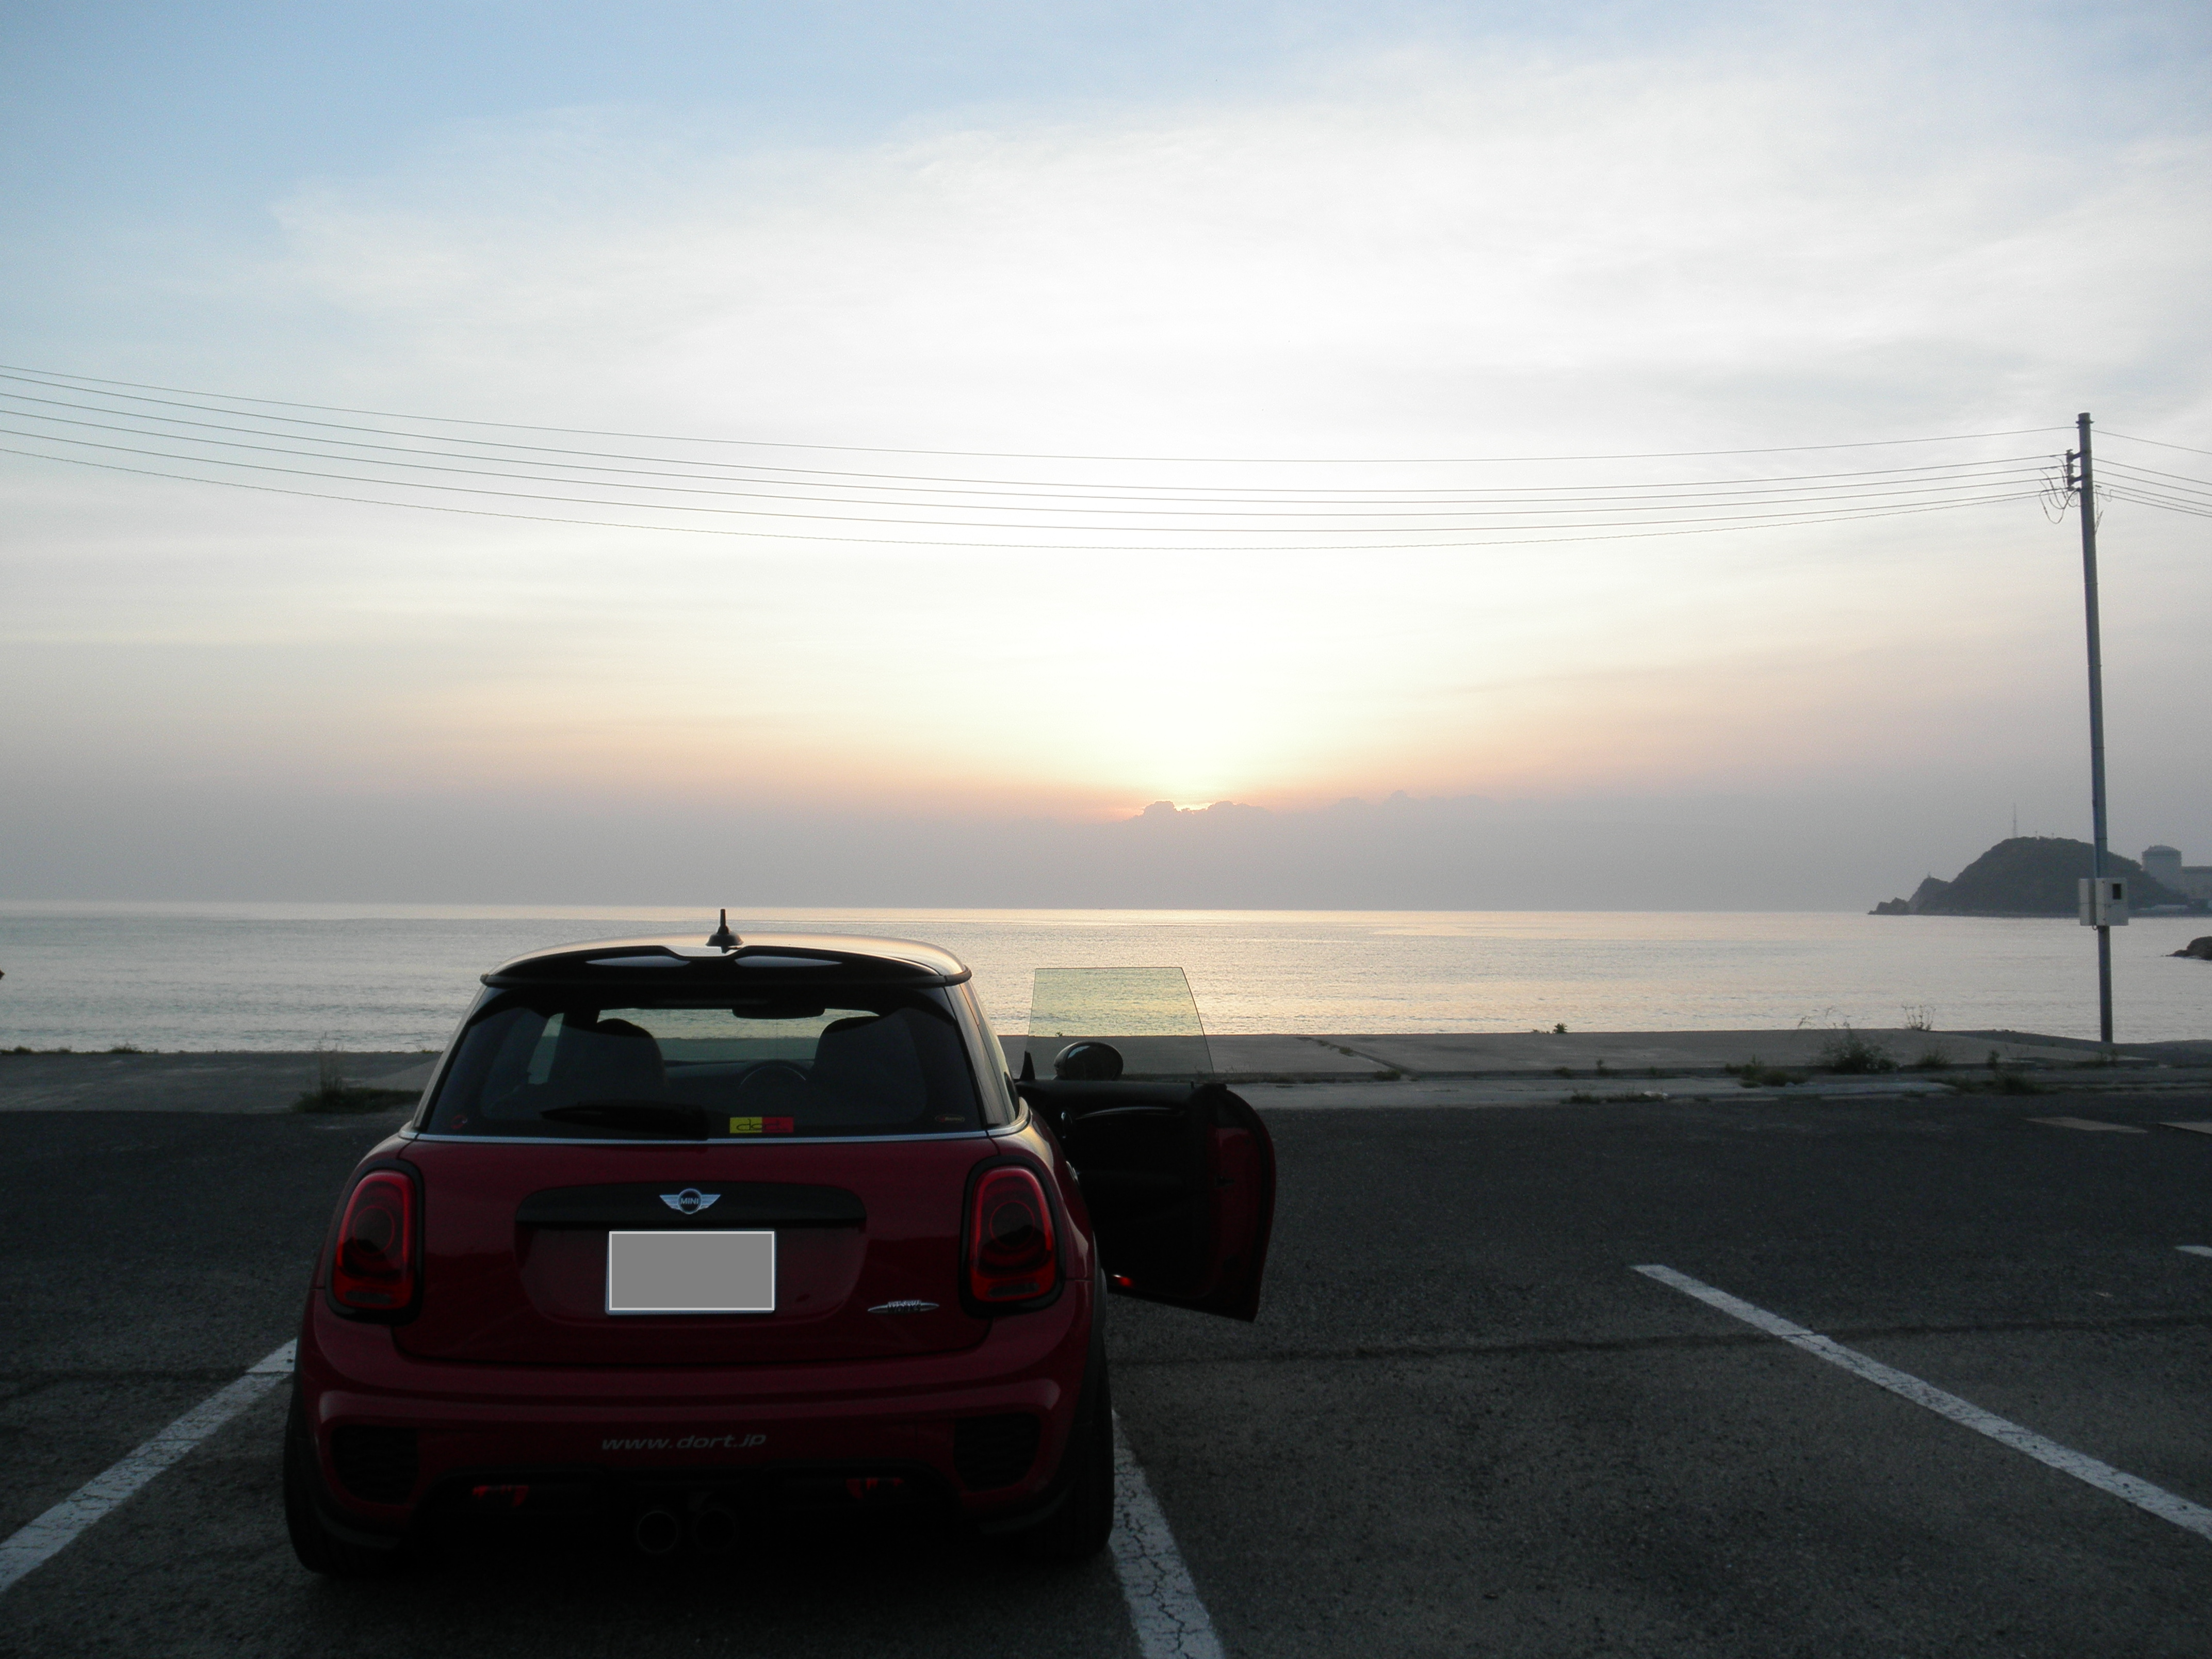 F56JCW.png